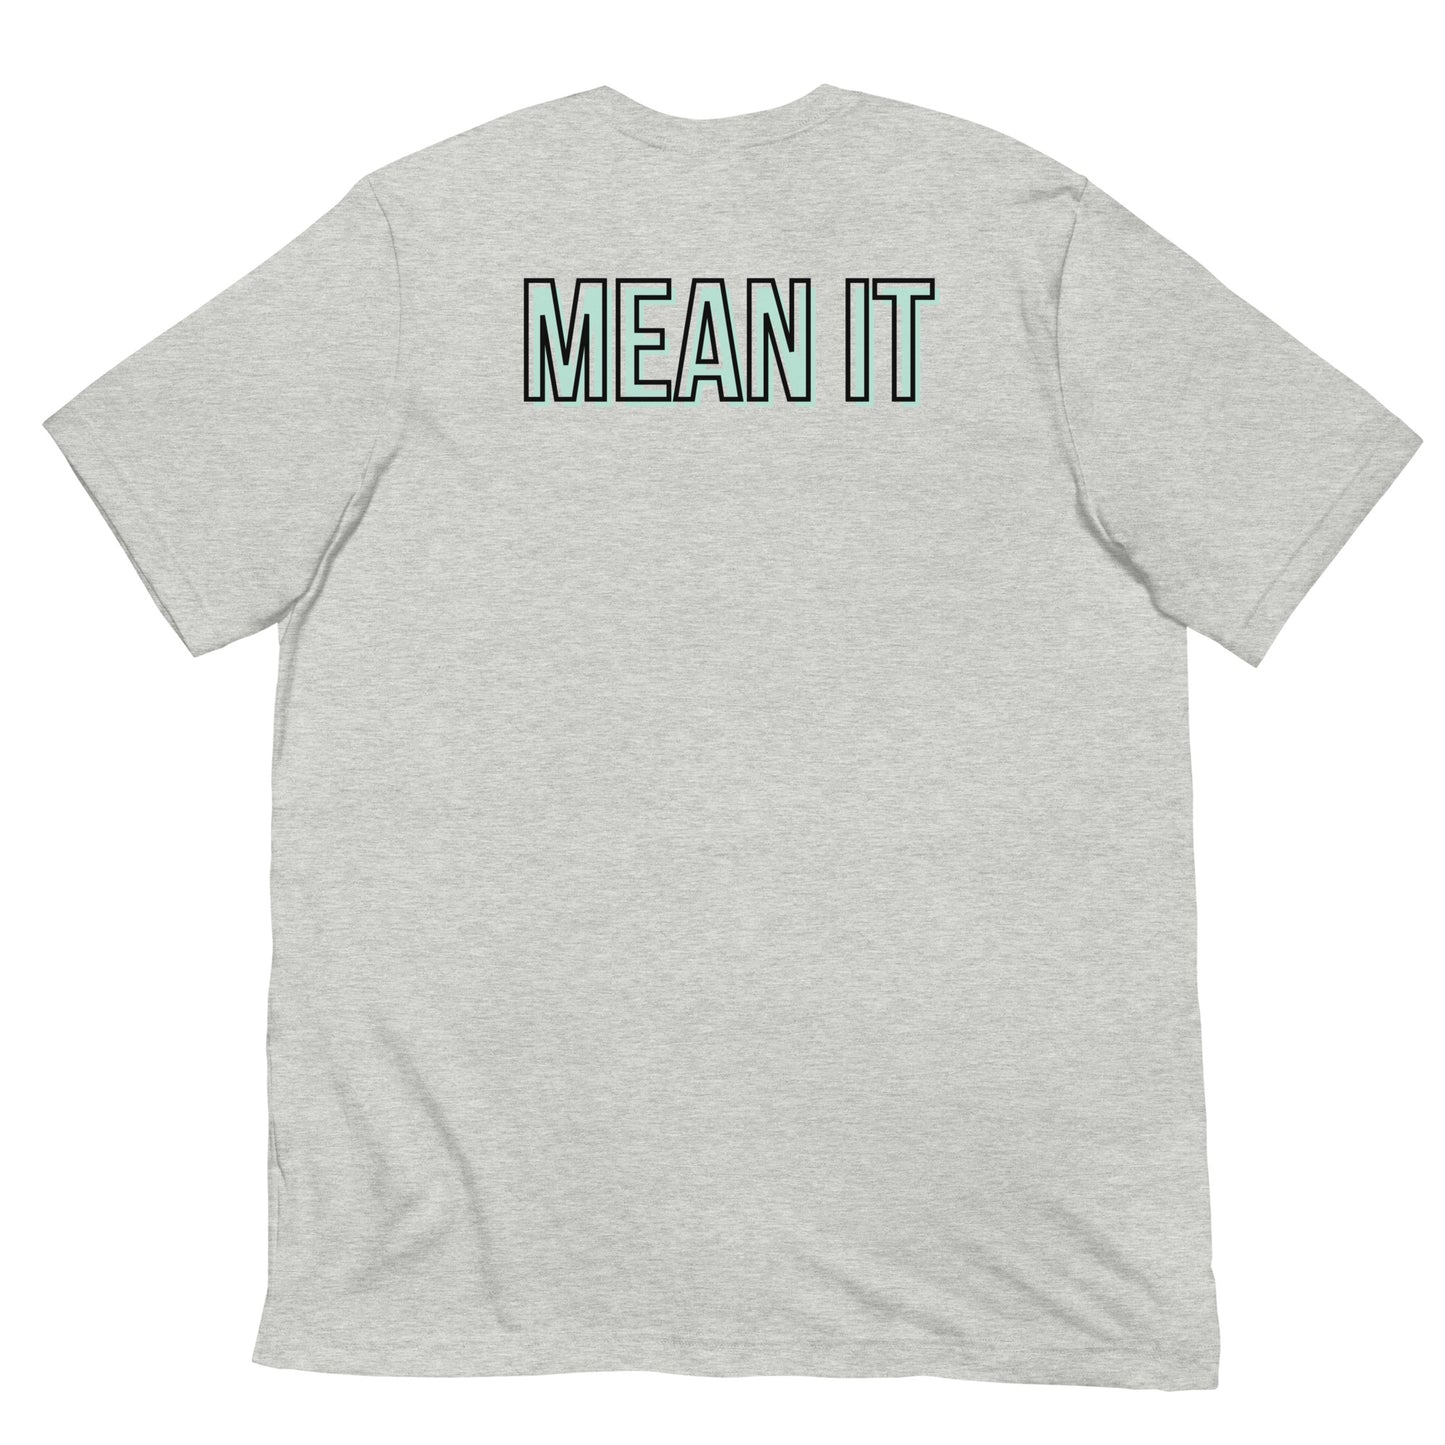 Love You, Mean It Tee